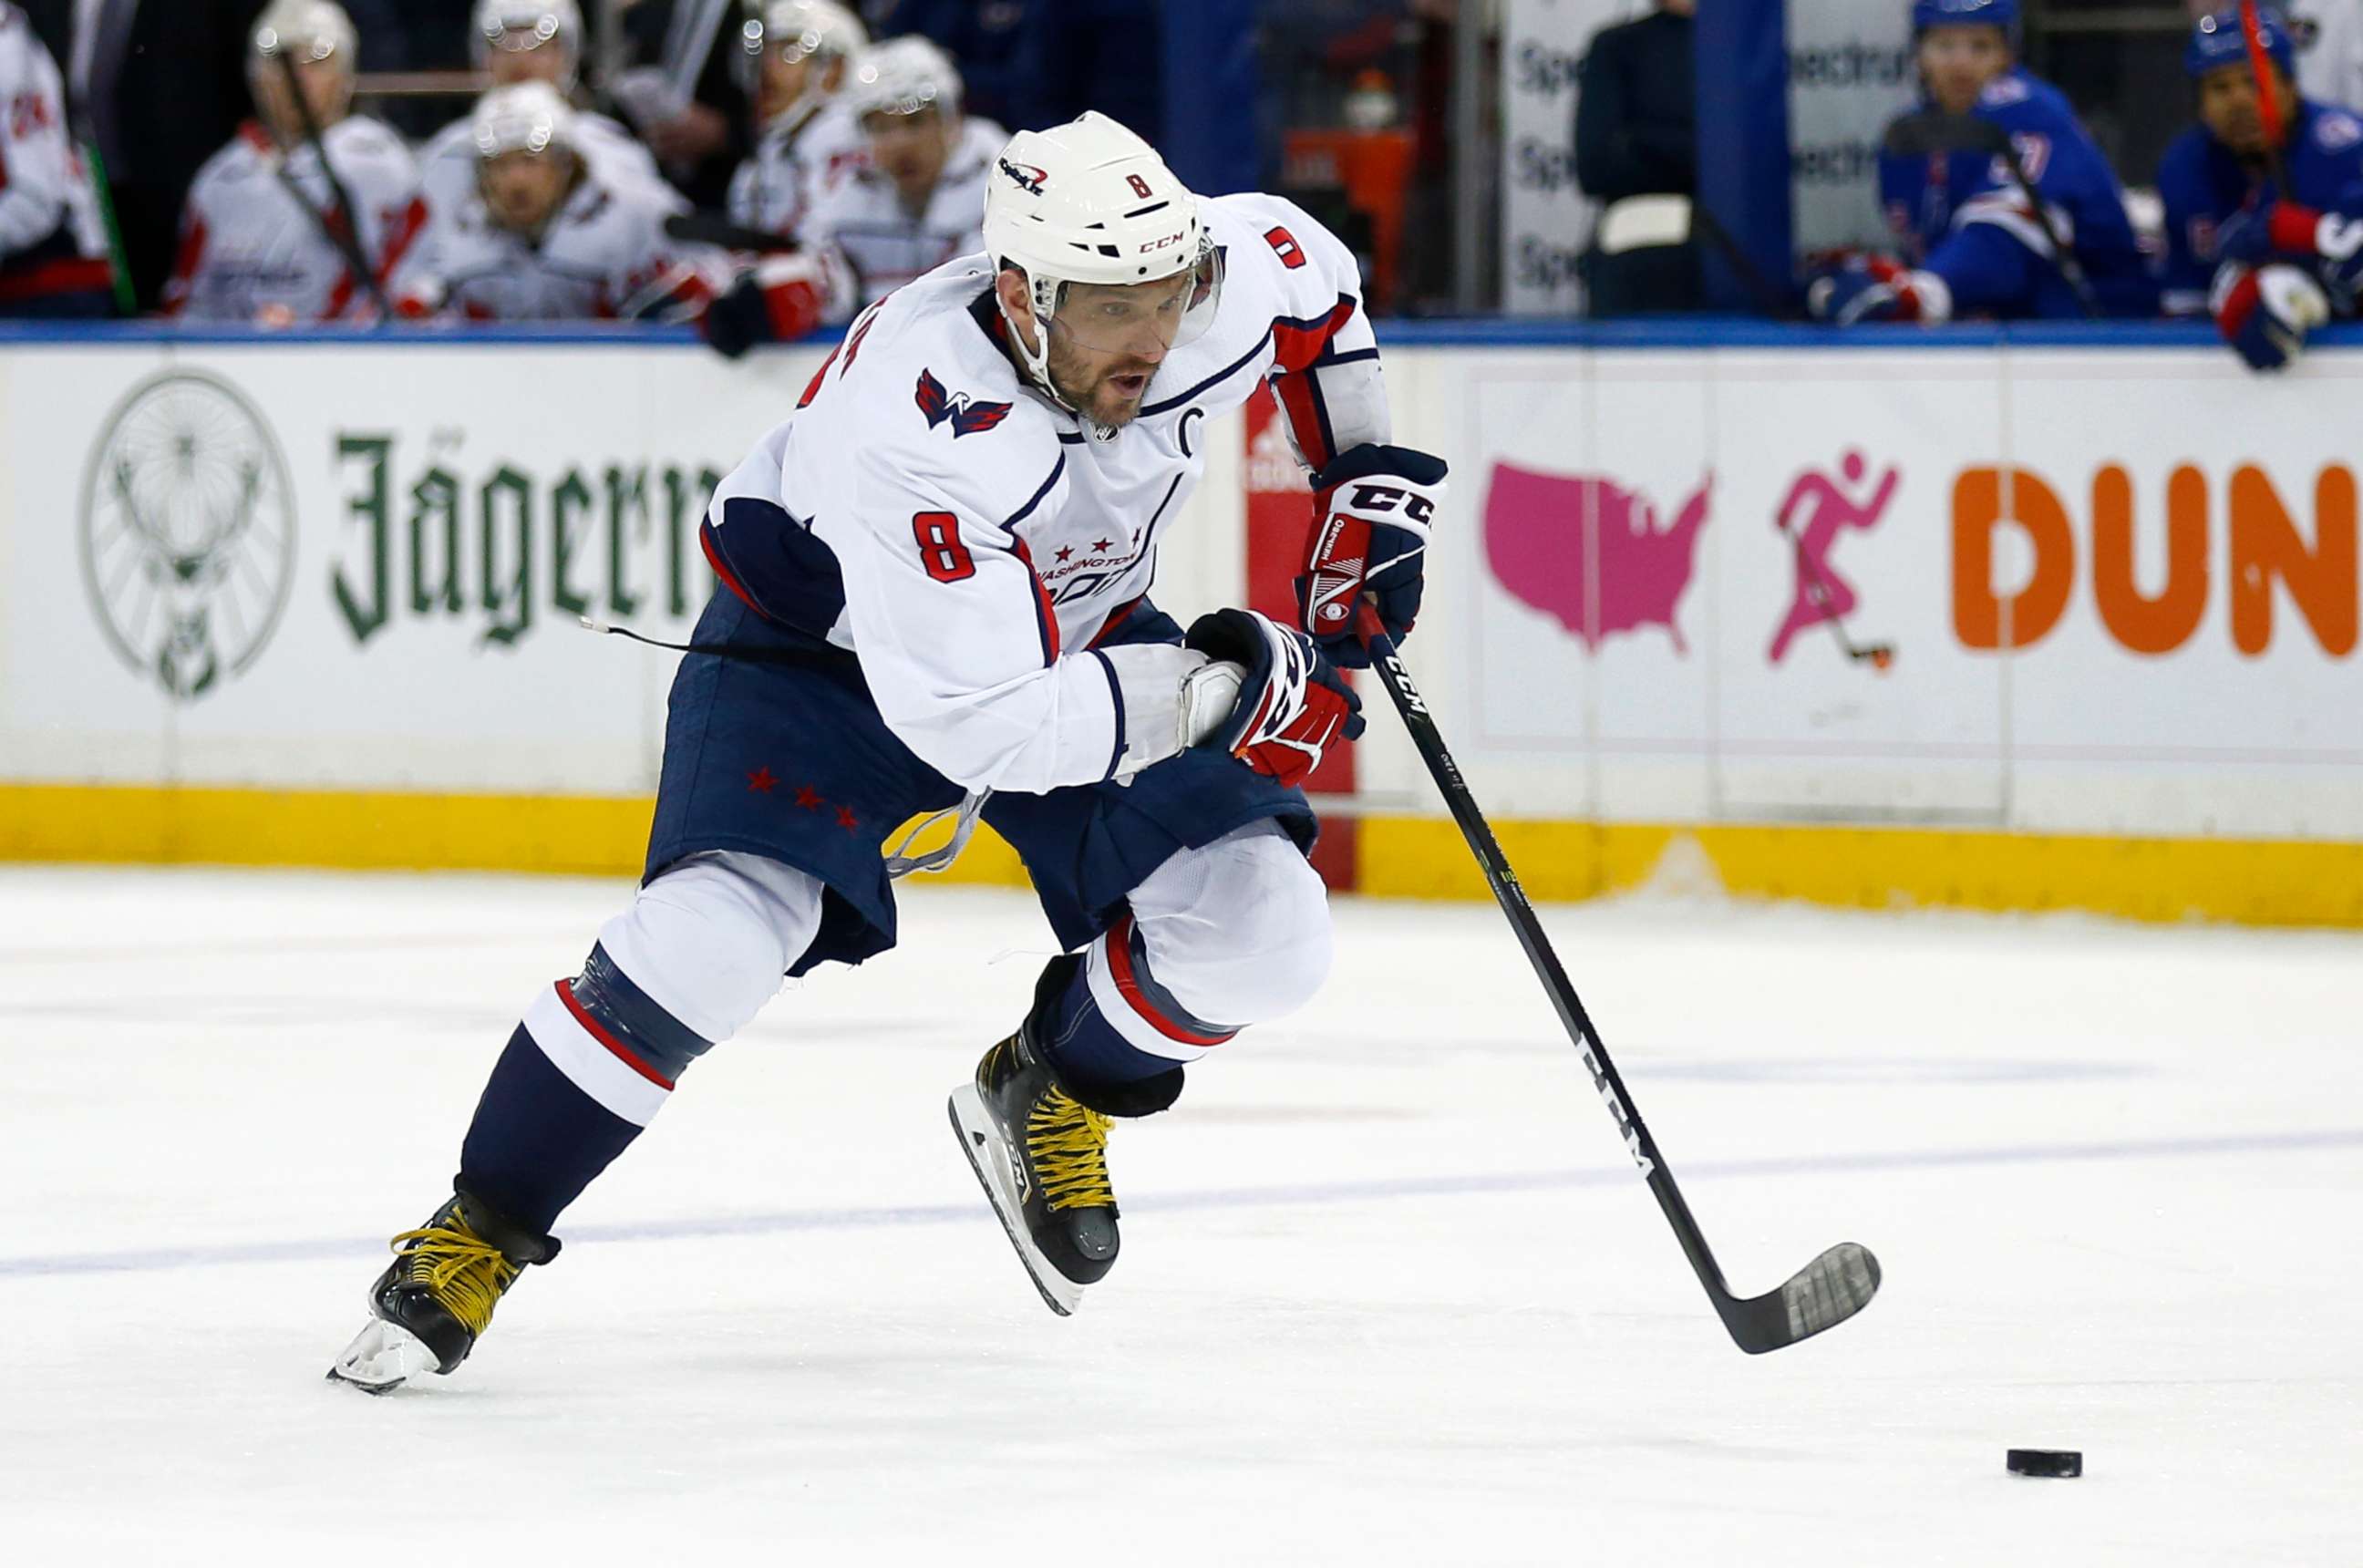 PHOTO: Washington Capitals' Alex Ovechkin skates with the puck on a breakaway during the third period of the team's NHL hockey game against the New York Rangers, Feb. 24, 2022, in New York.